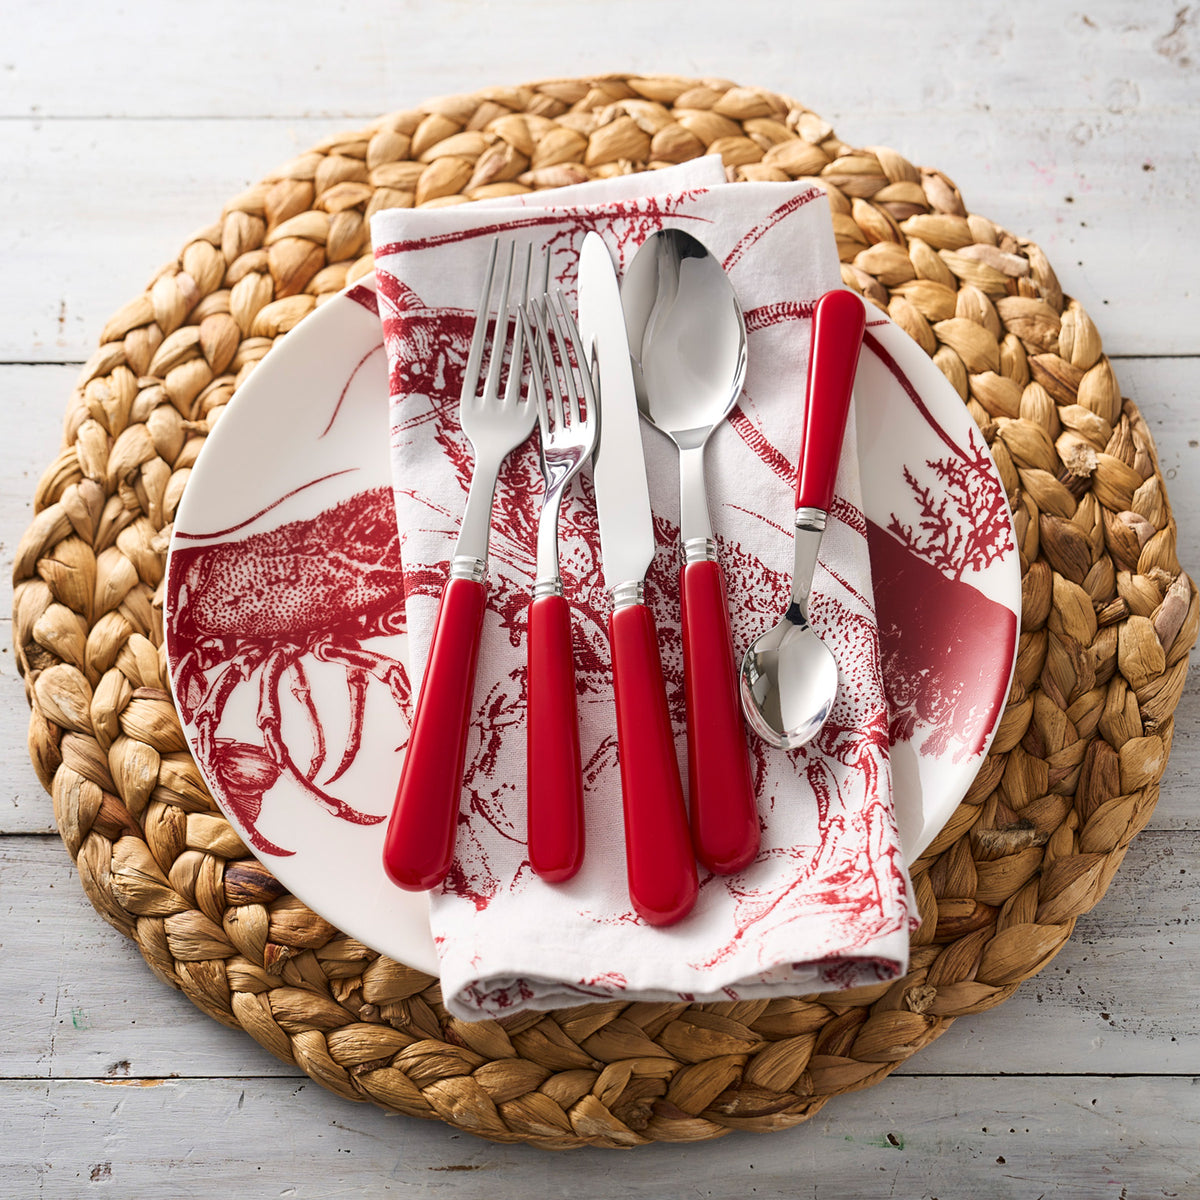 Red Lobster dinner plate by Caskata on a round woven placemat with matching red lobster napkin and red handled flatware.